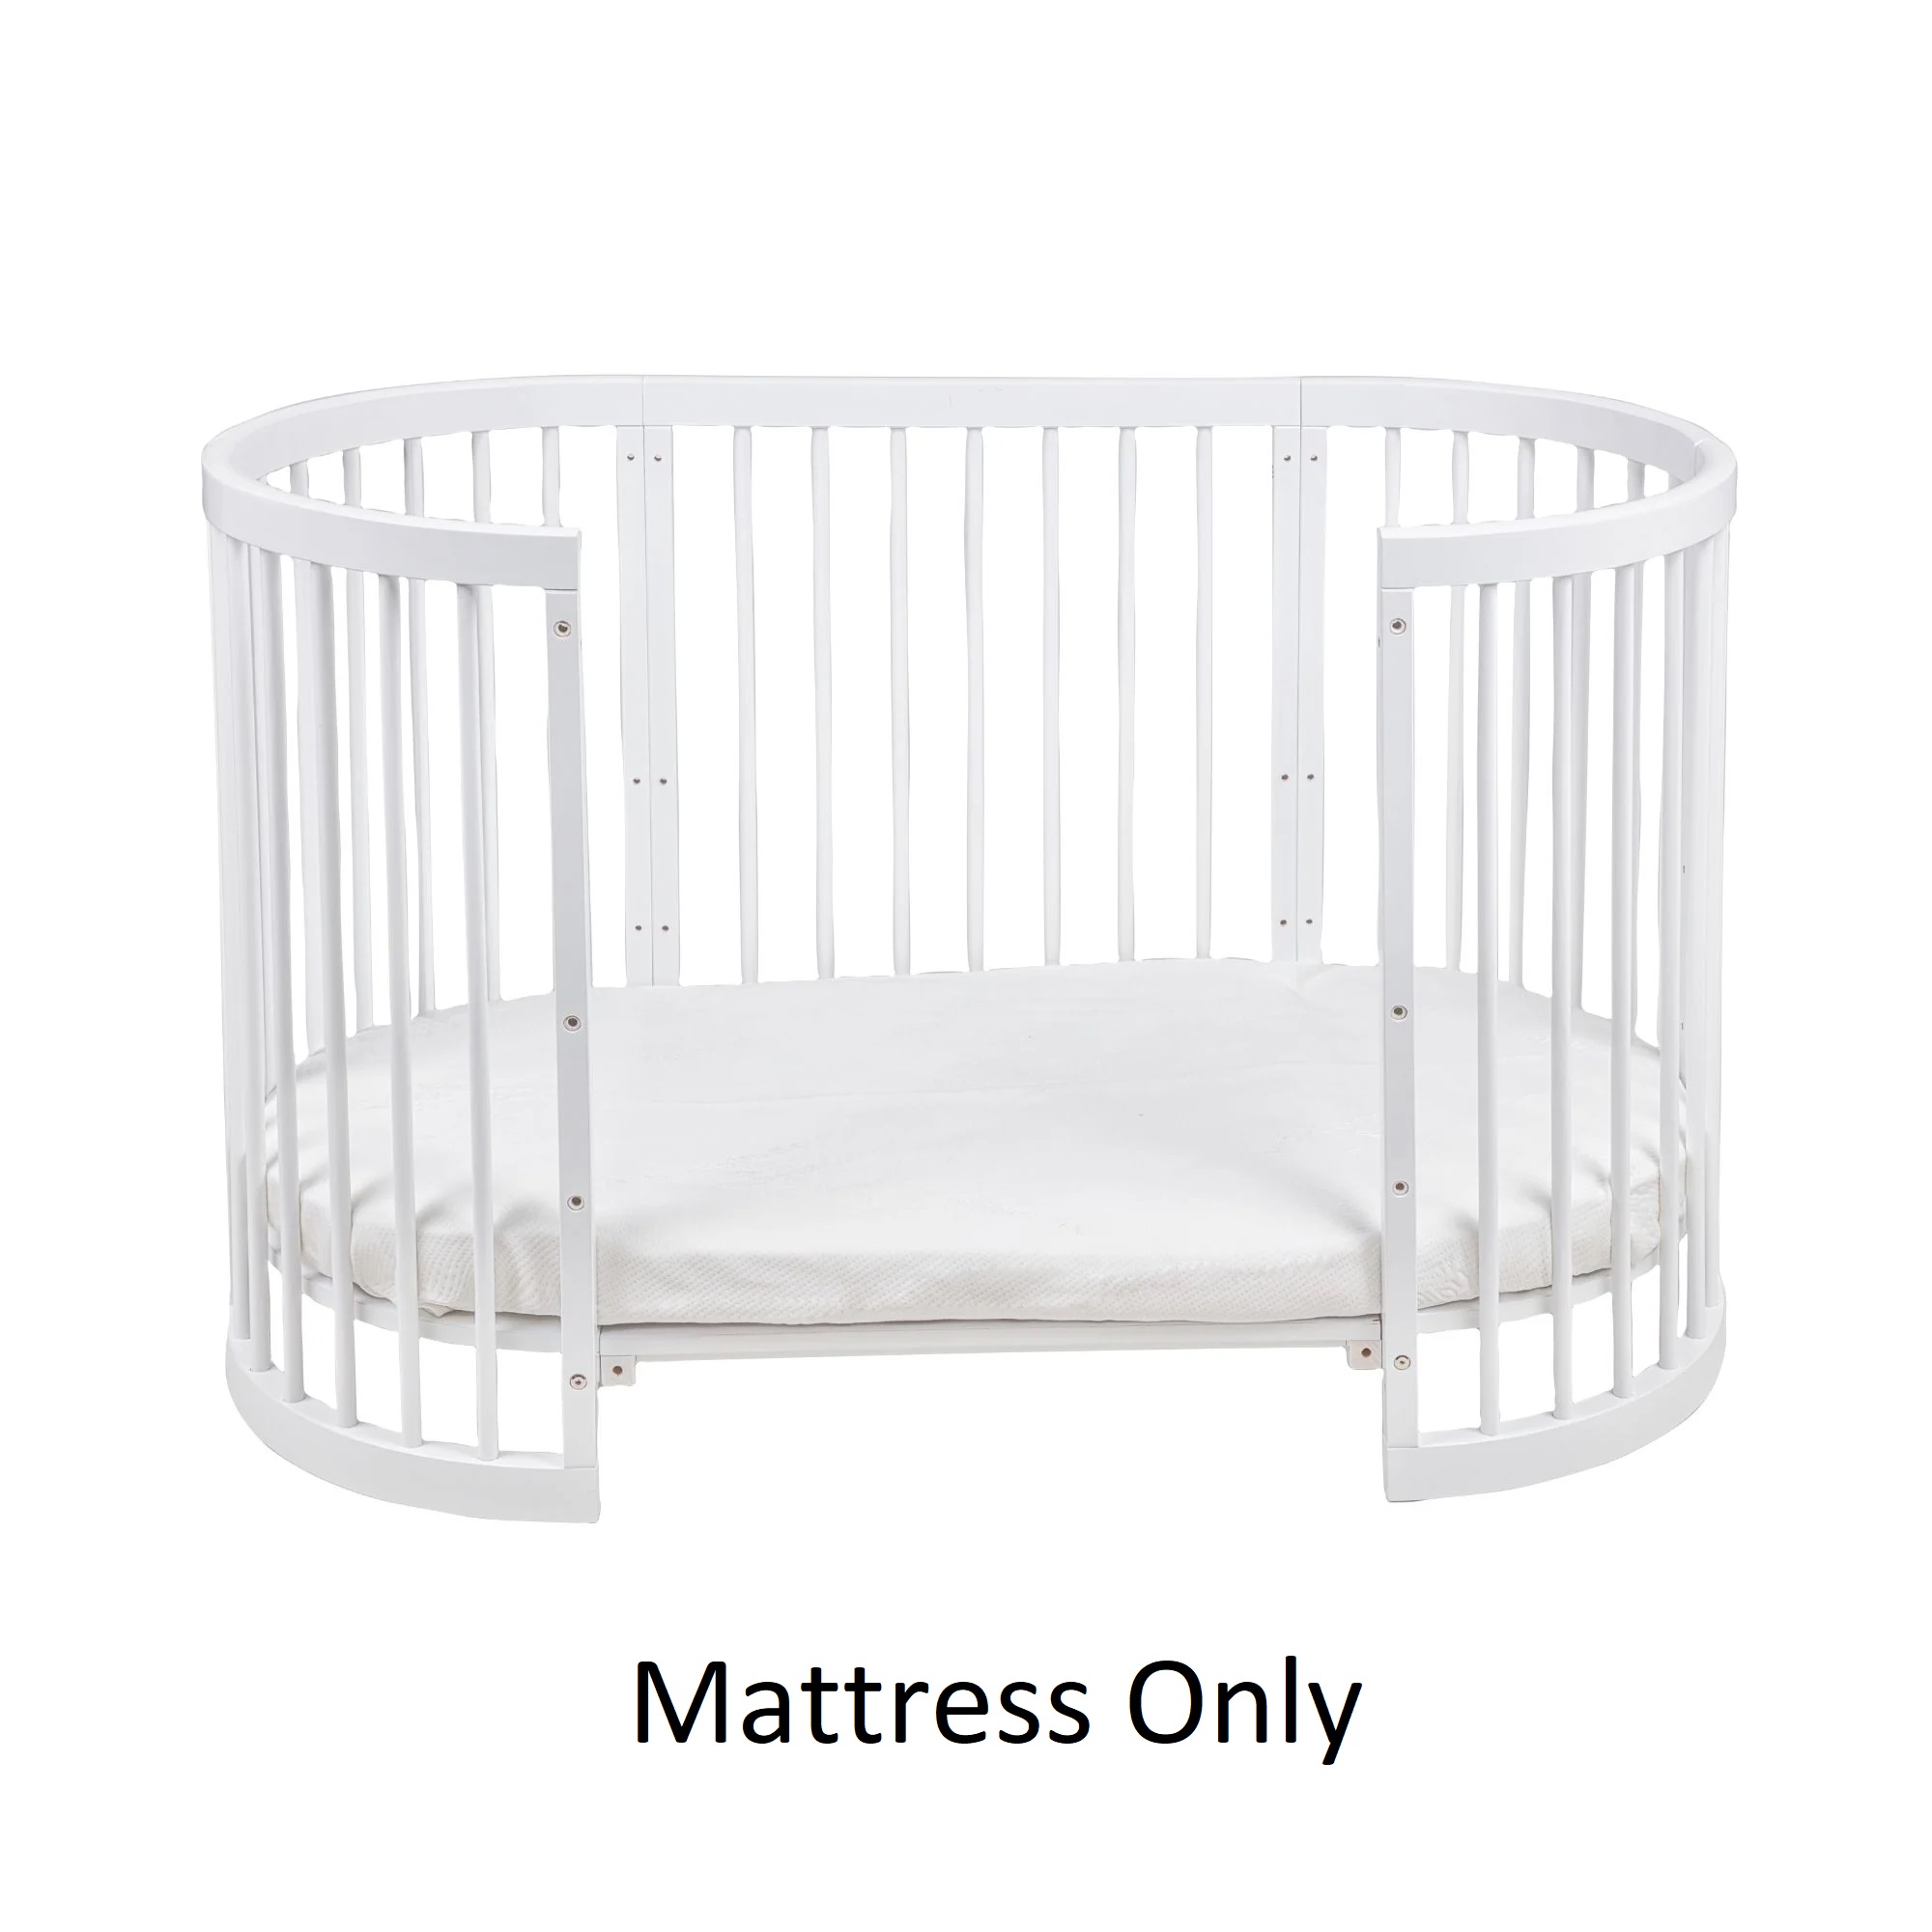 Bonbijou Round Cot Latex Mattress with Quilted Cover